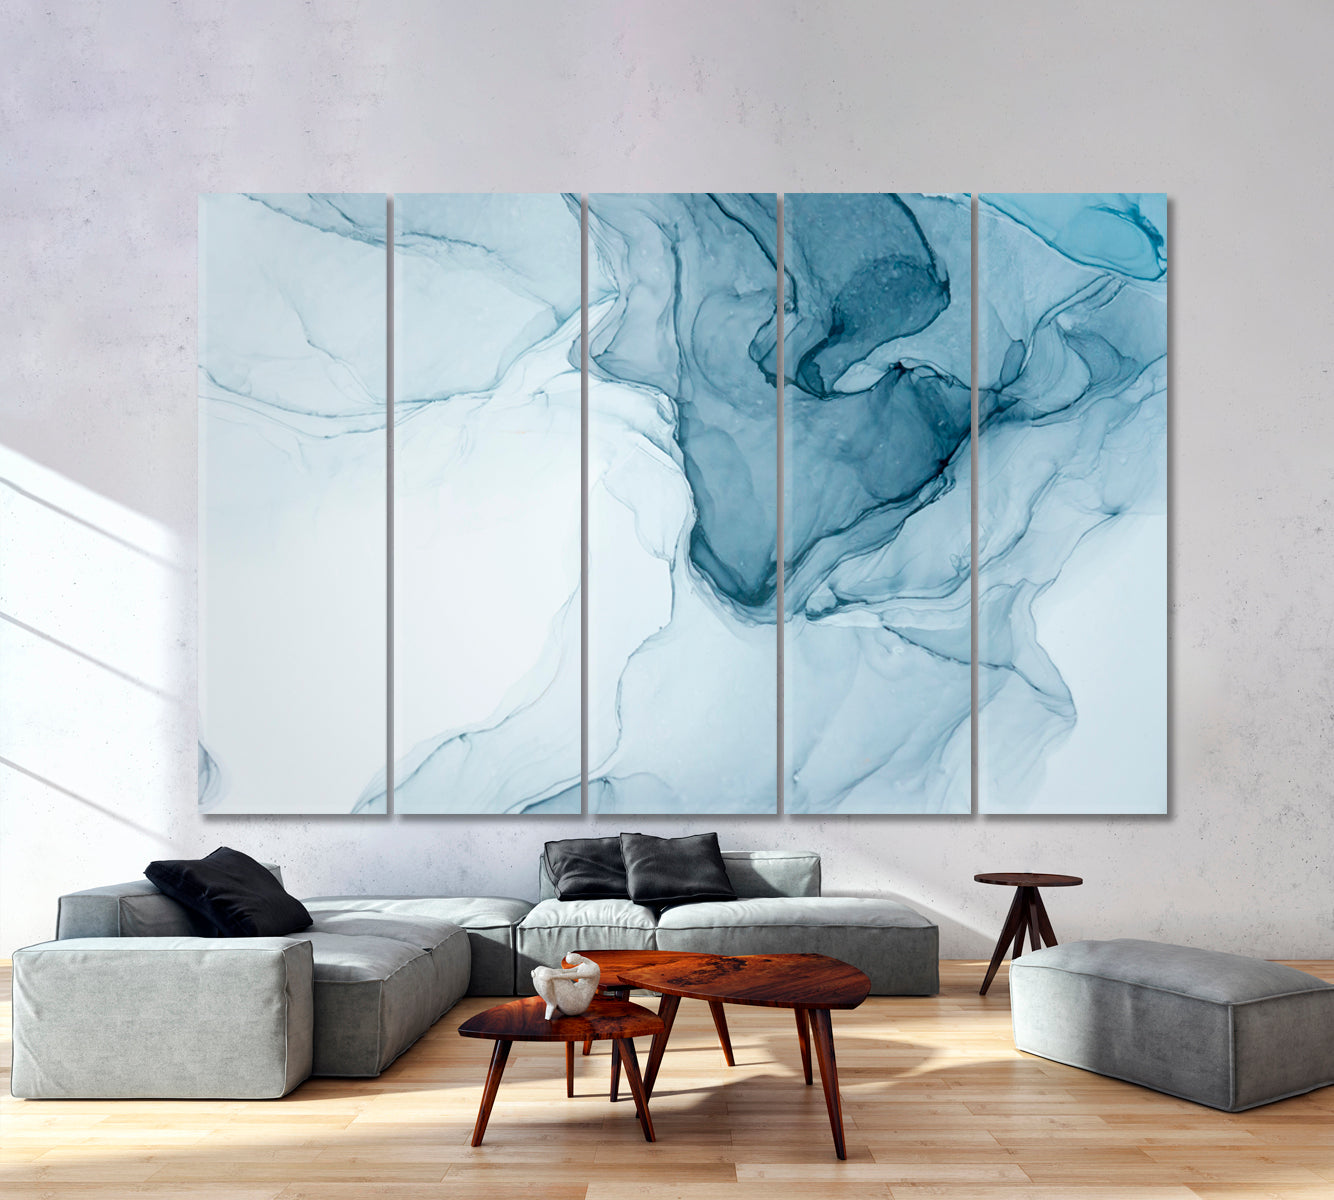 Marble Alcohol Ink Abstract Painting Soft Color Modern Artistic Motion Fluid Art, Oriental Marbling Canvas Print Artesty 5 panels 36" x 24" 